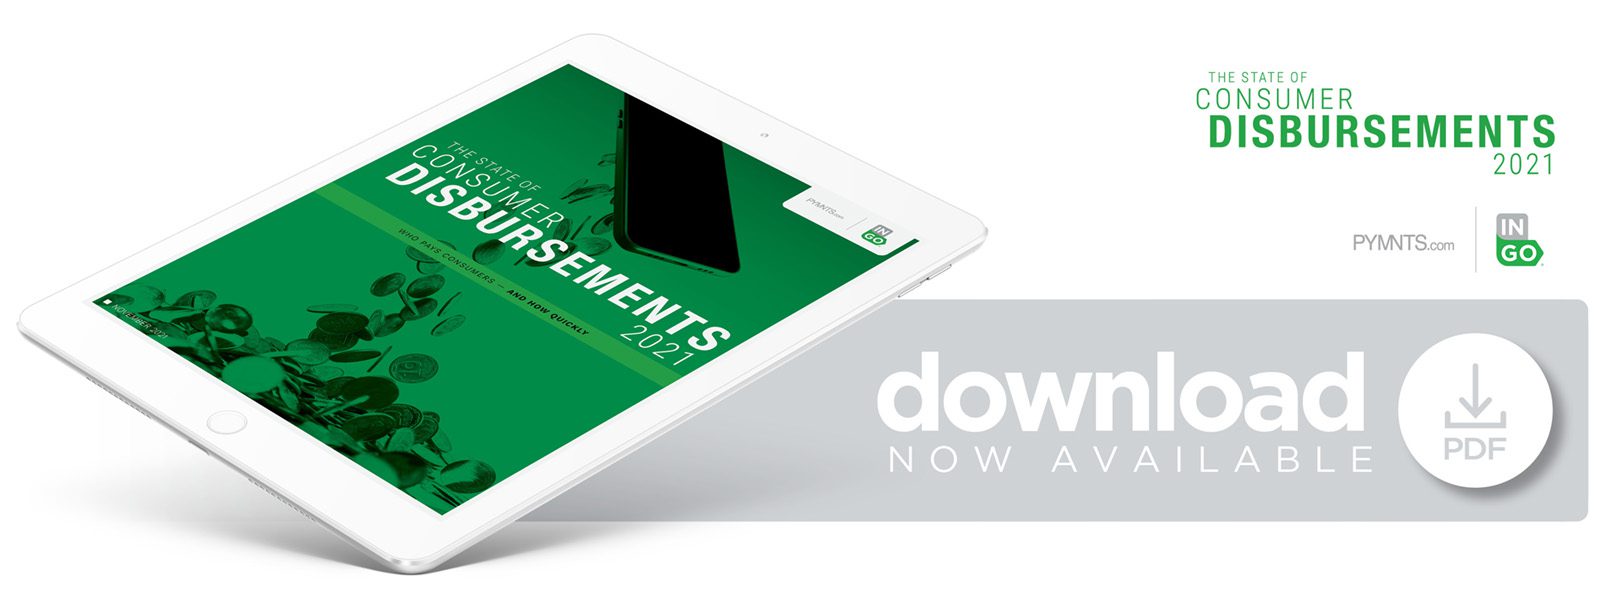 Download The State Of Consumer Disbursements November 2021 to explore consumer options on instant disbursement payment choices